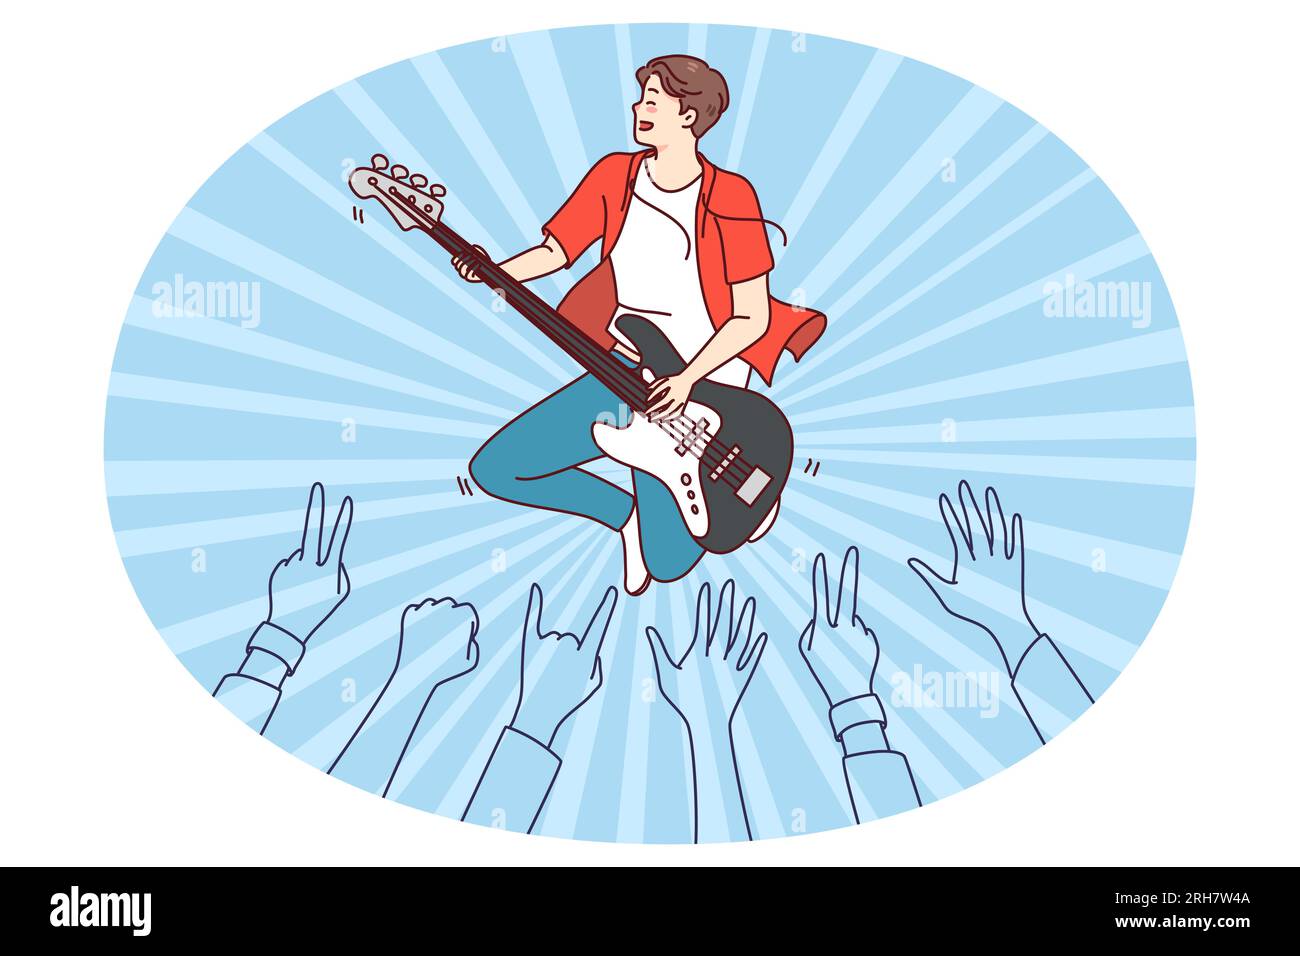 Crowd enjoying concert of male artist. Man performer playing guitar on stage for audience. Flat vector illustration. Stock Vector